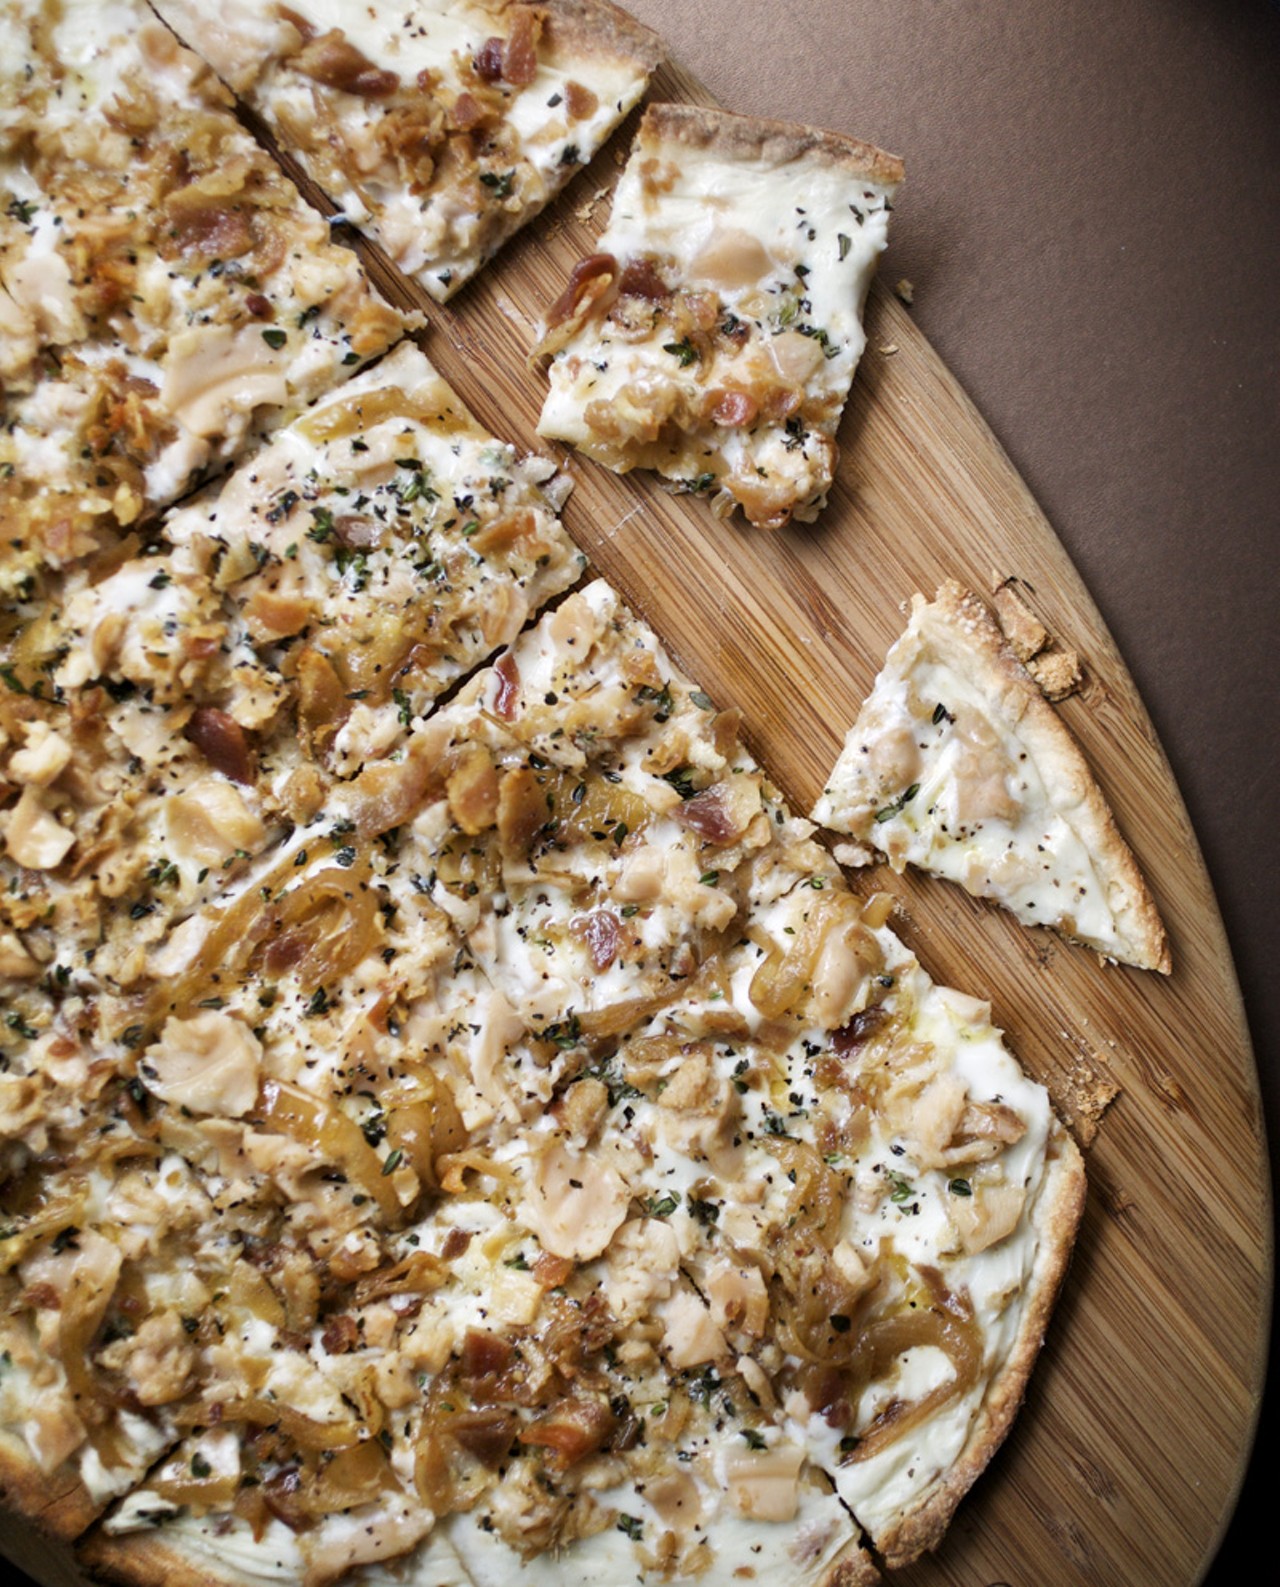 White Clam Pizza is made with fresh clams, thyme, pancetta, garlic, caramelized onions and white sauce.